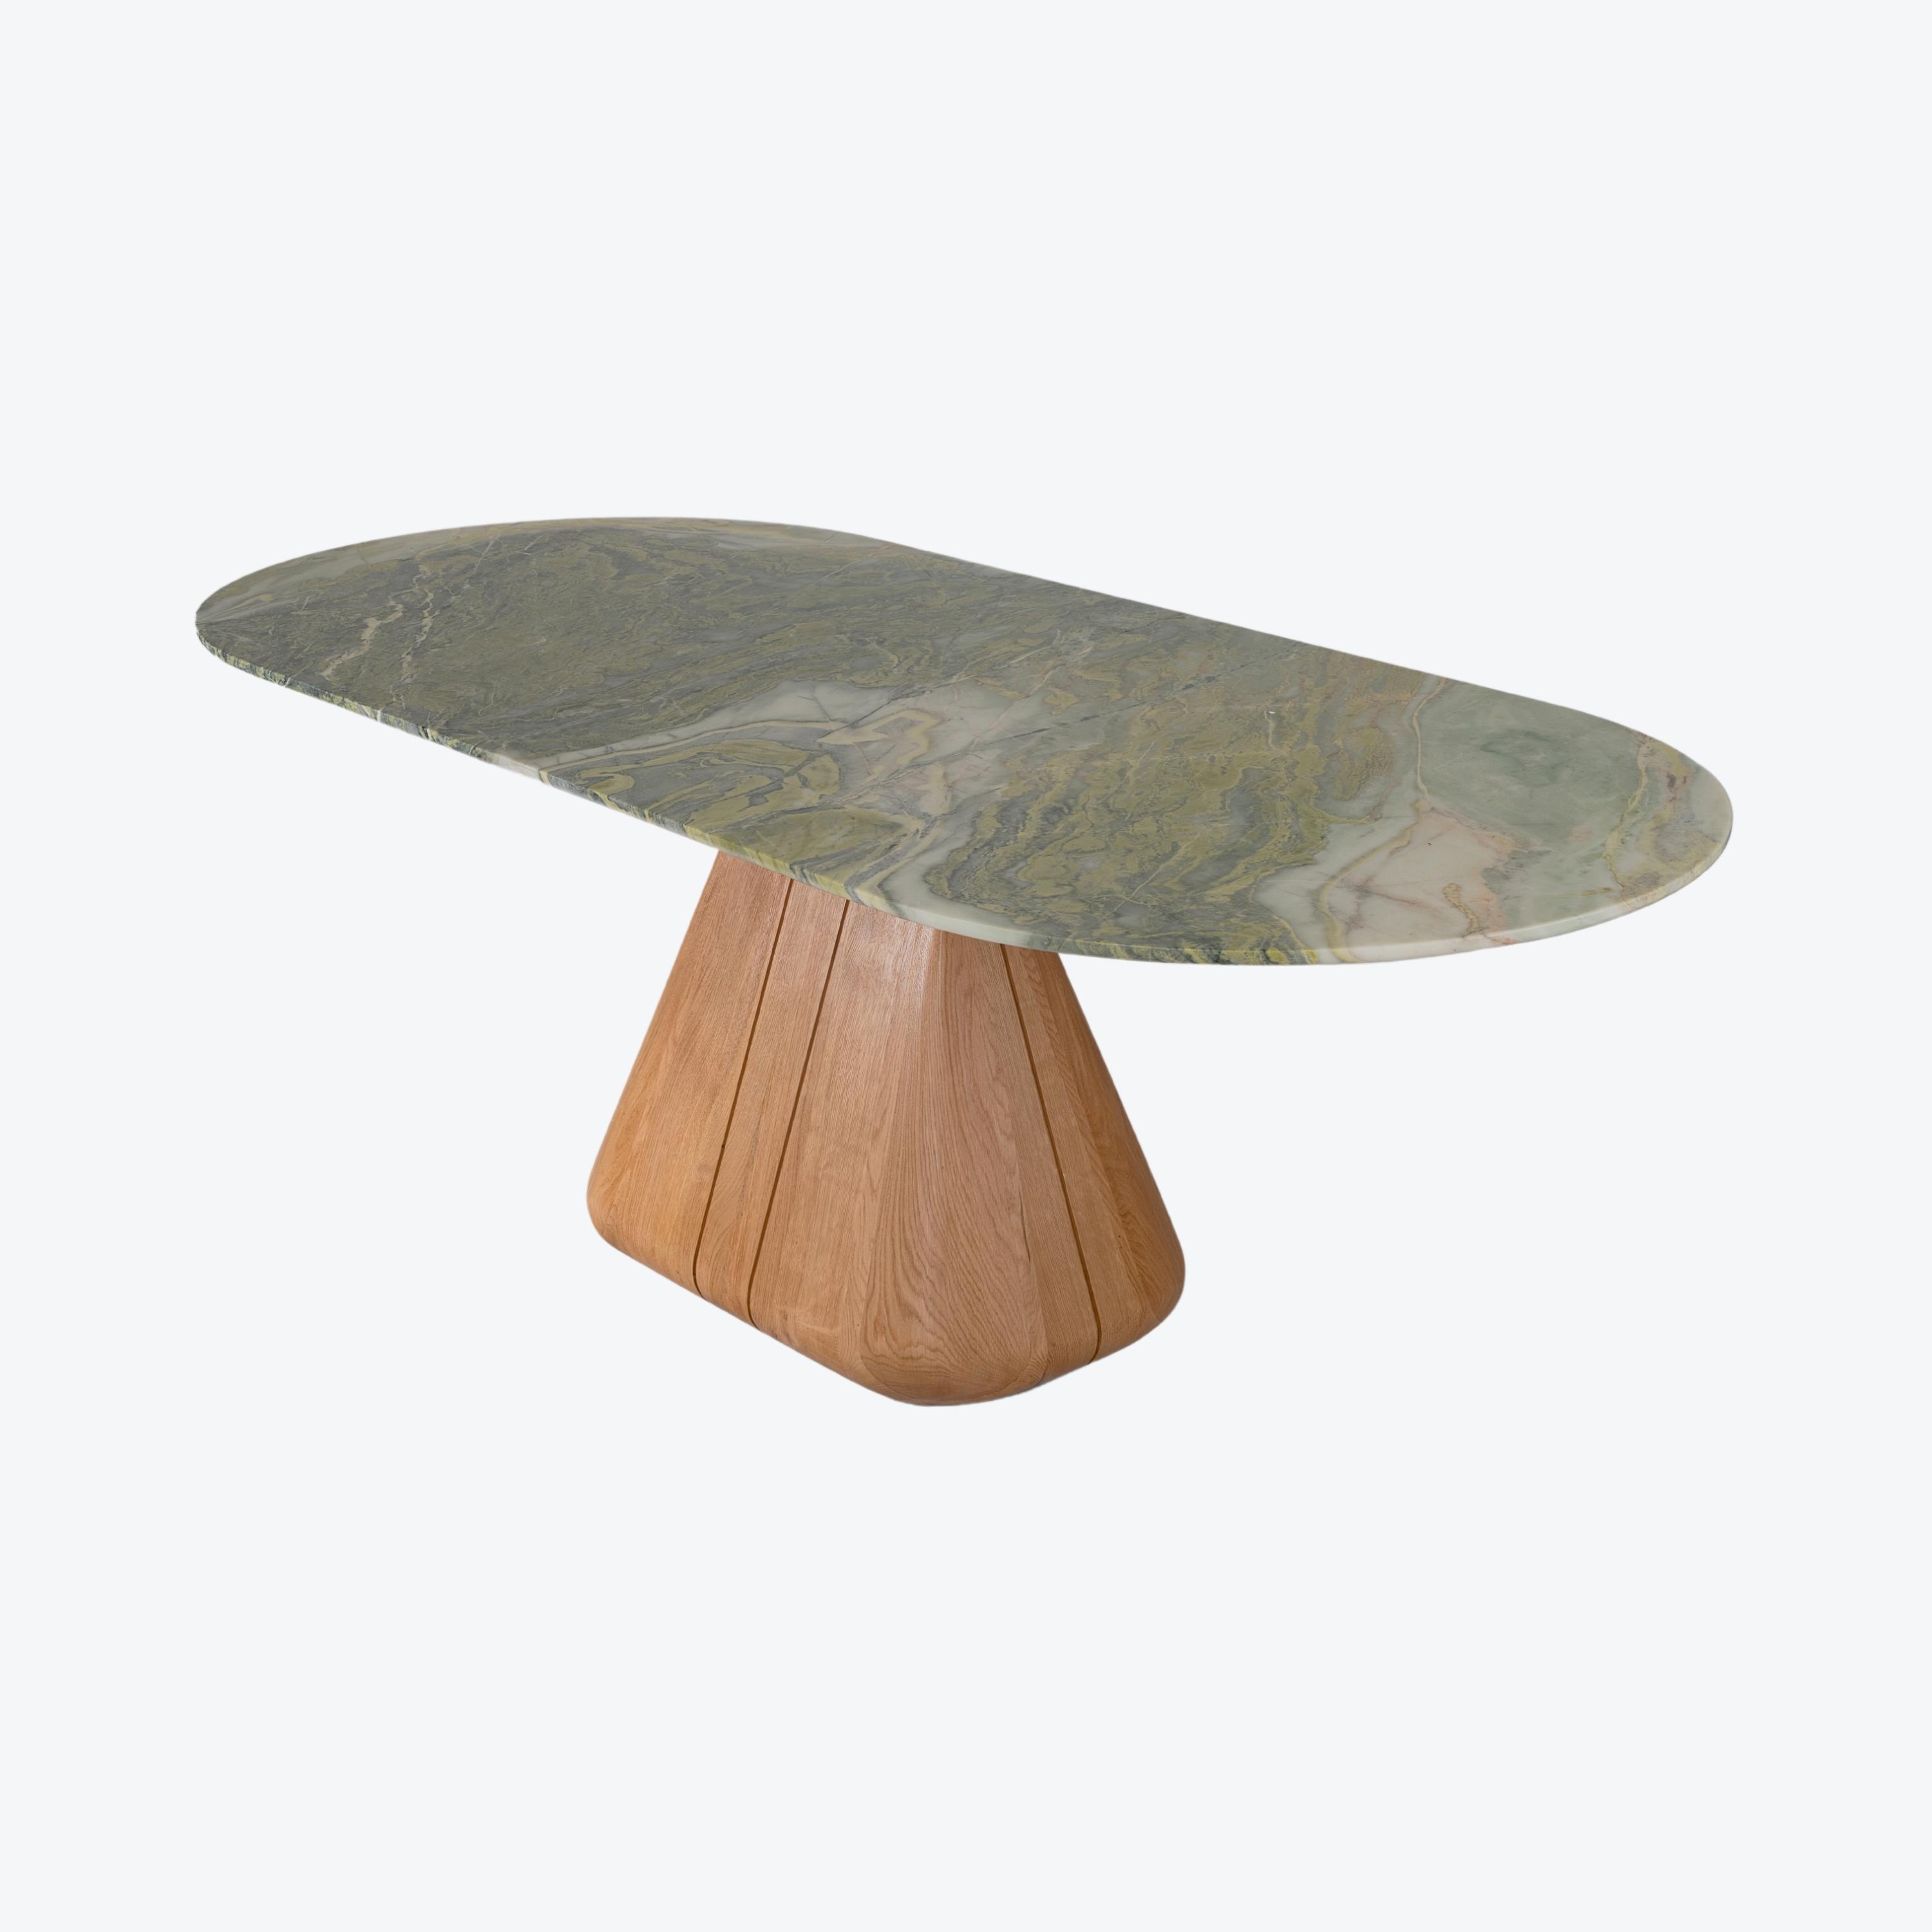 Udukkai Oak Dining Table Atelier Pendhapa The Invisible Collection